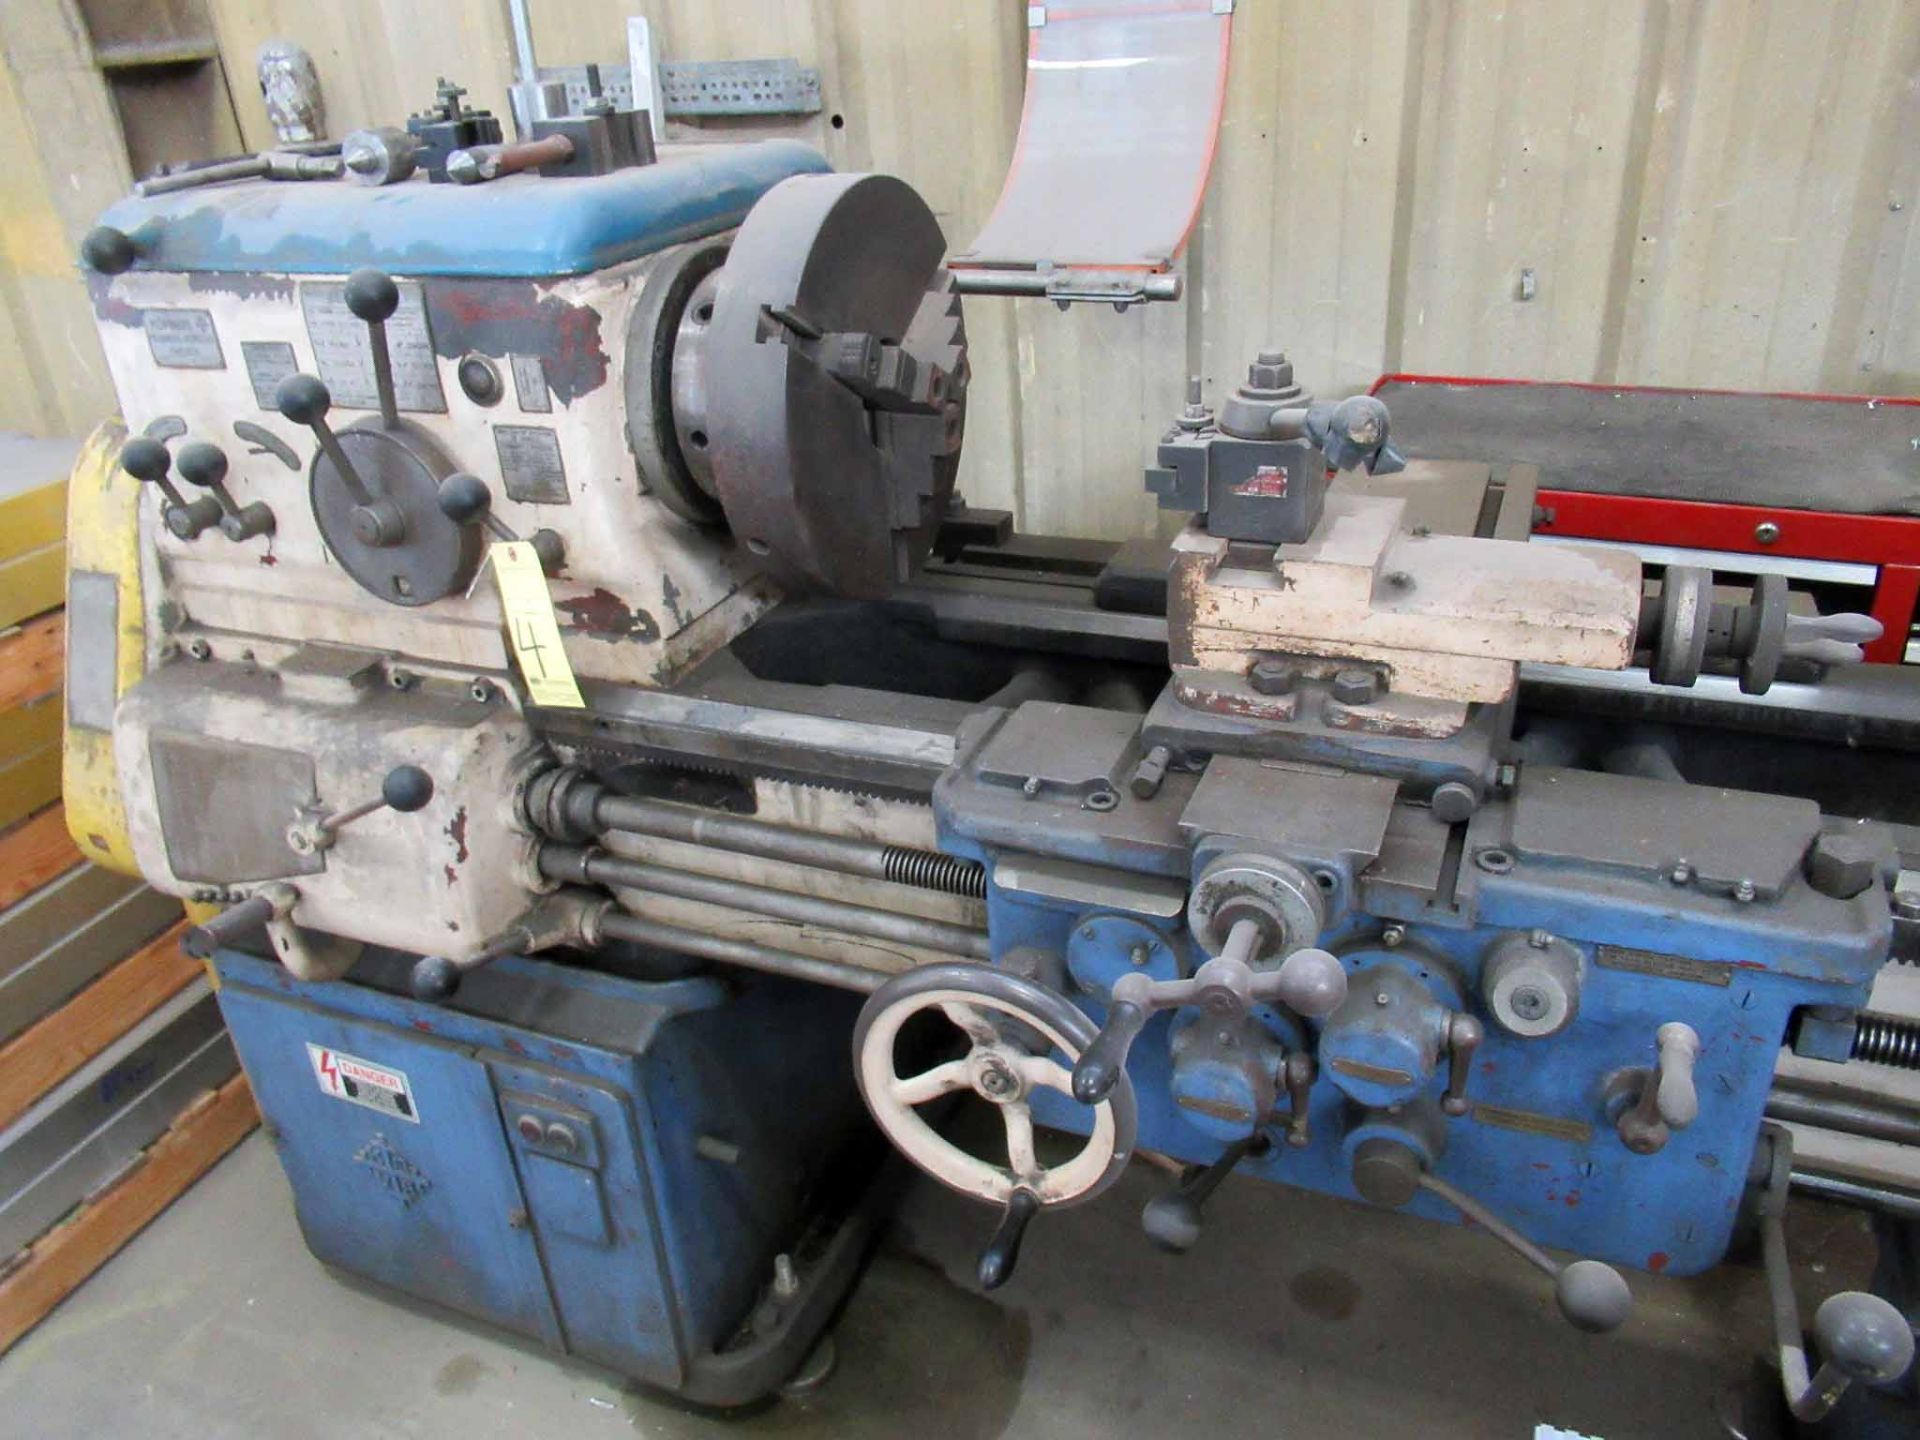 ENGINE LATHE, KOPINGS 20” X 40” MDL. S10B, 2-3/4” spdl. bore, taper attach., 15” dia. 3-jaw chuck, - Image 2 of 4